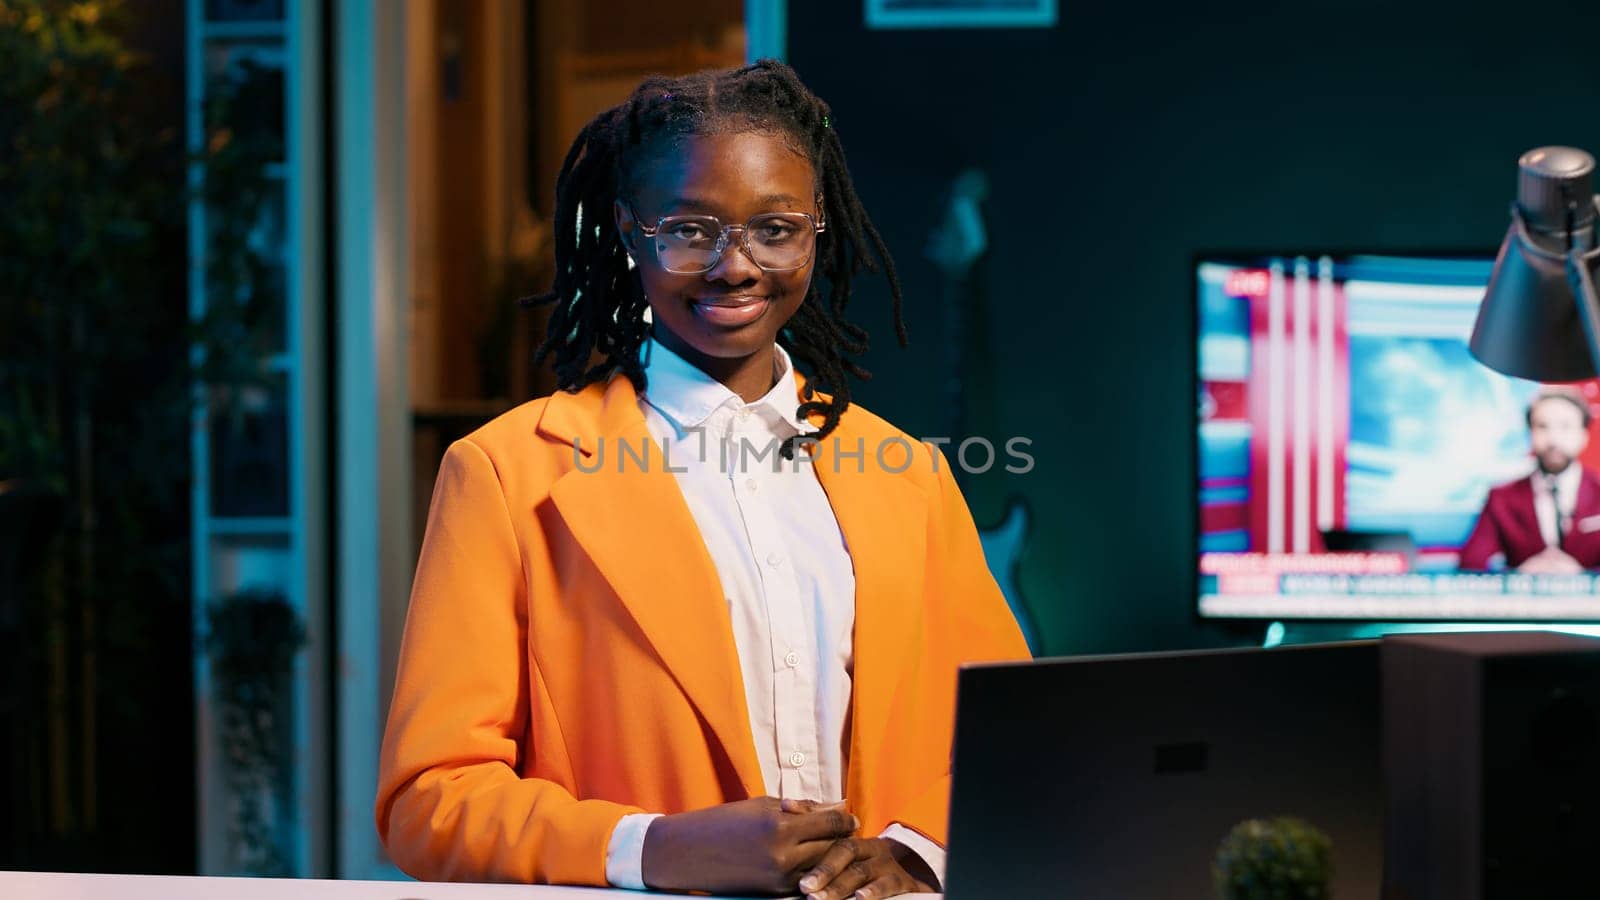 Portrait of university student sitting at her home desk using laptop to do school tasks. Young woman exploring career pathways and networking opportunities through professional platforms. Camera A.